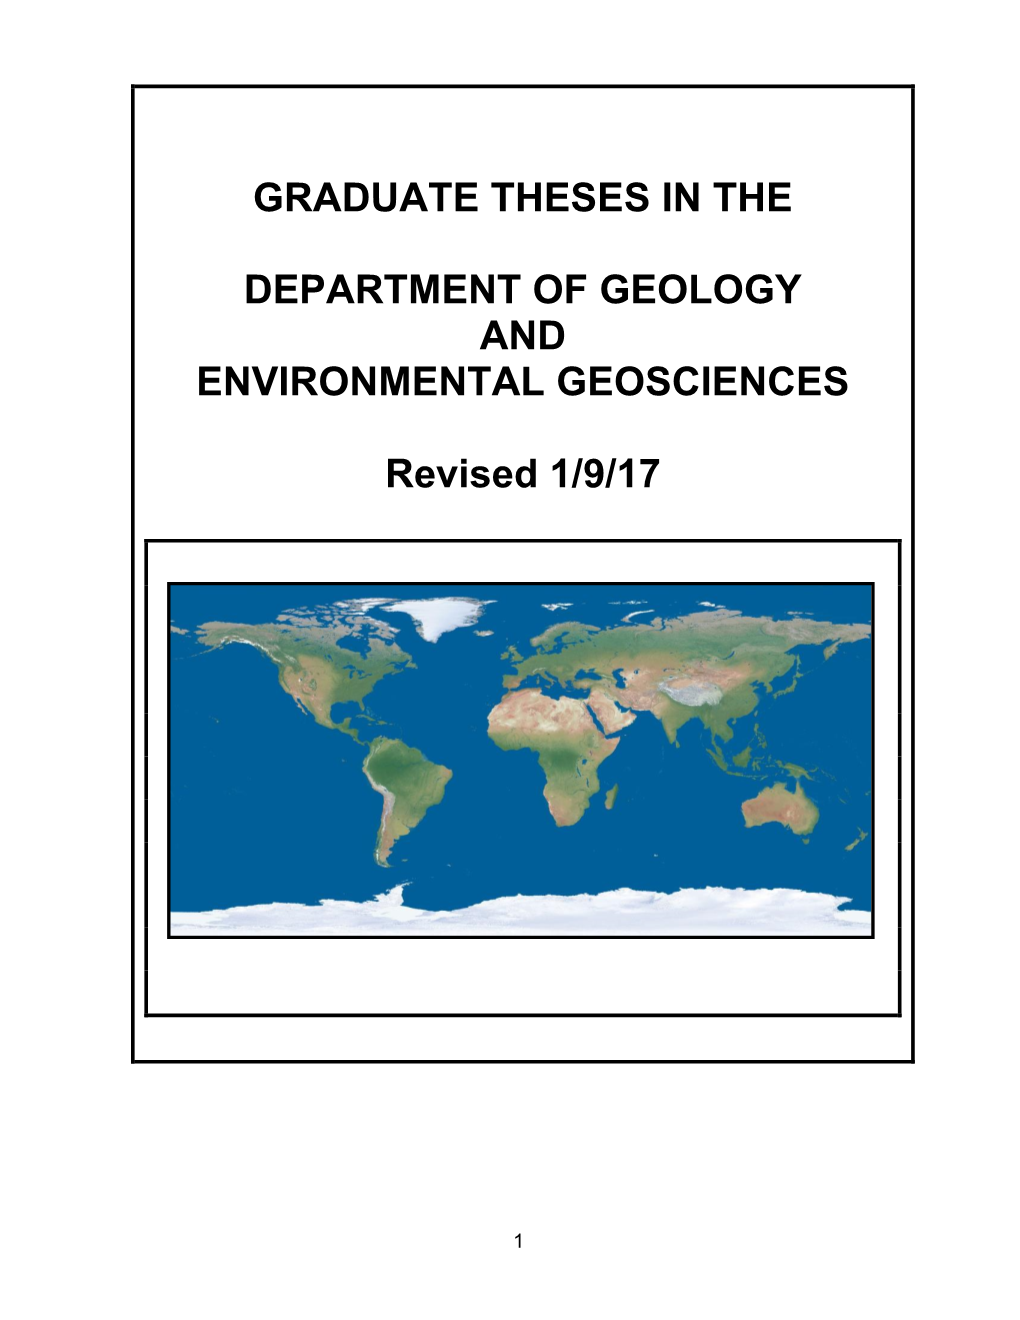 Graduate Theses in the Department of Geology And